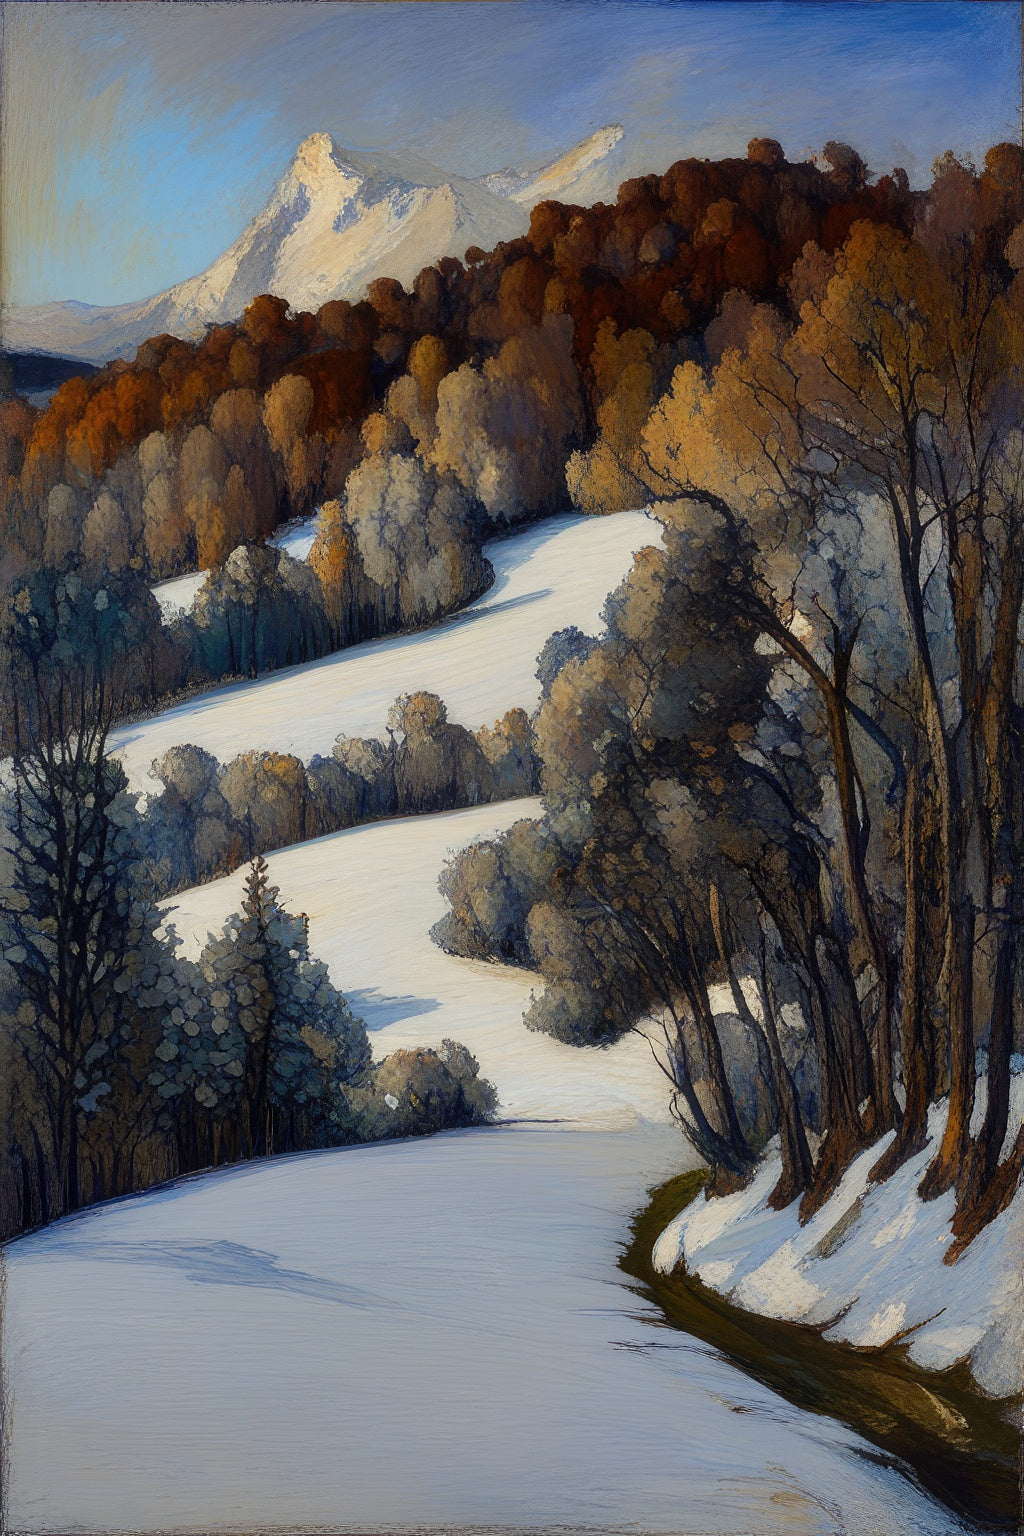 Snow Covered Forest Landscape with Mountains Painting Art Print